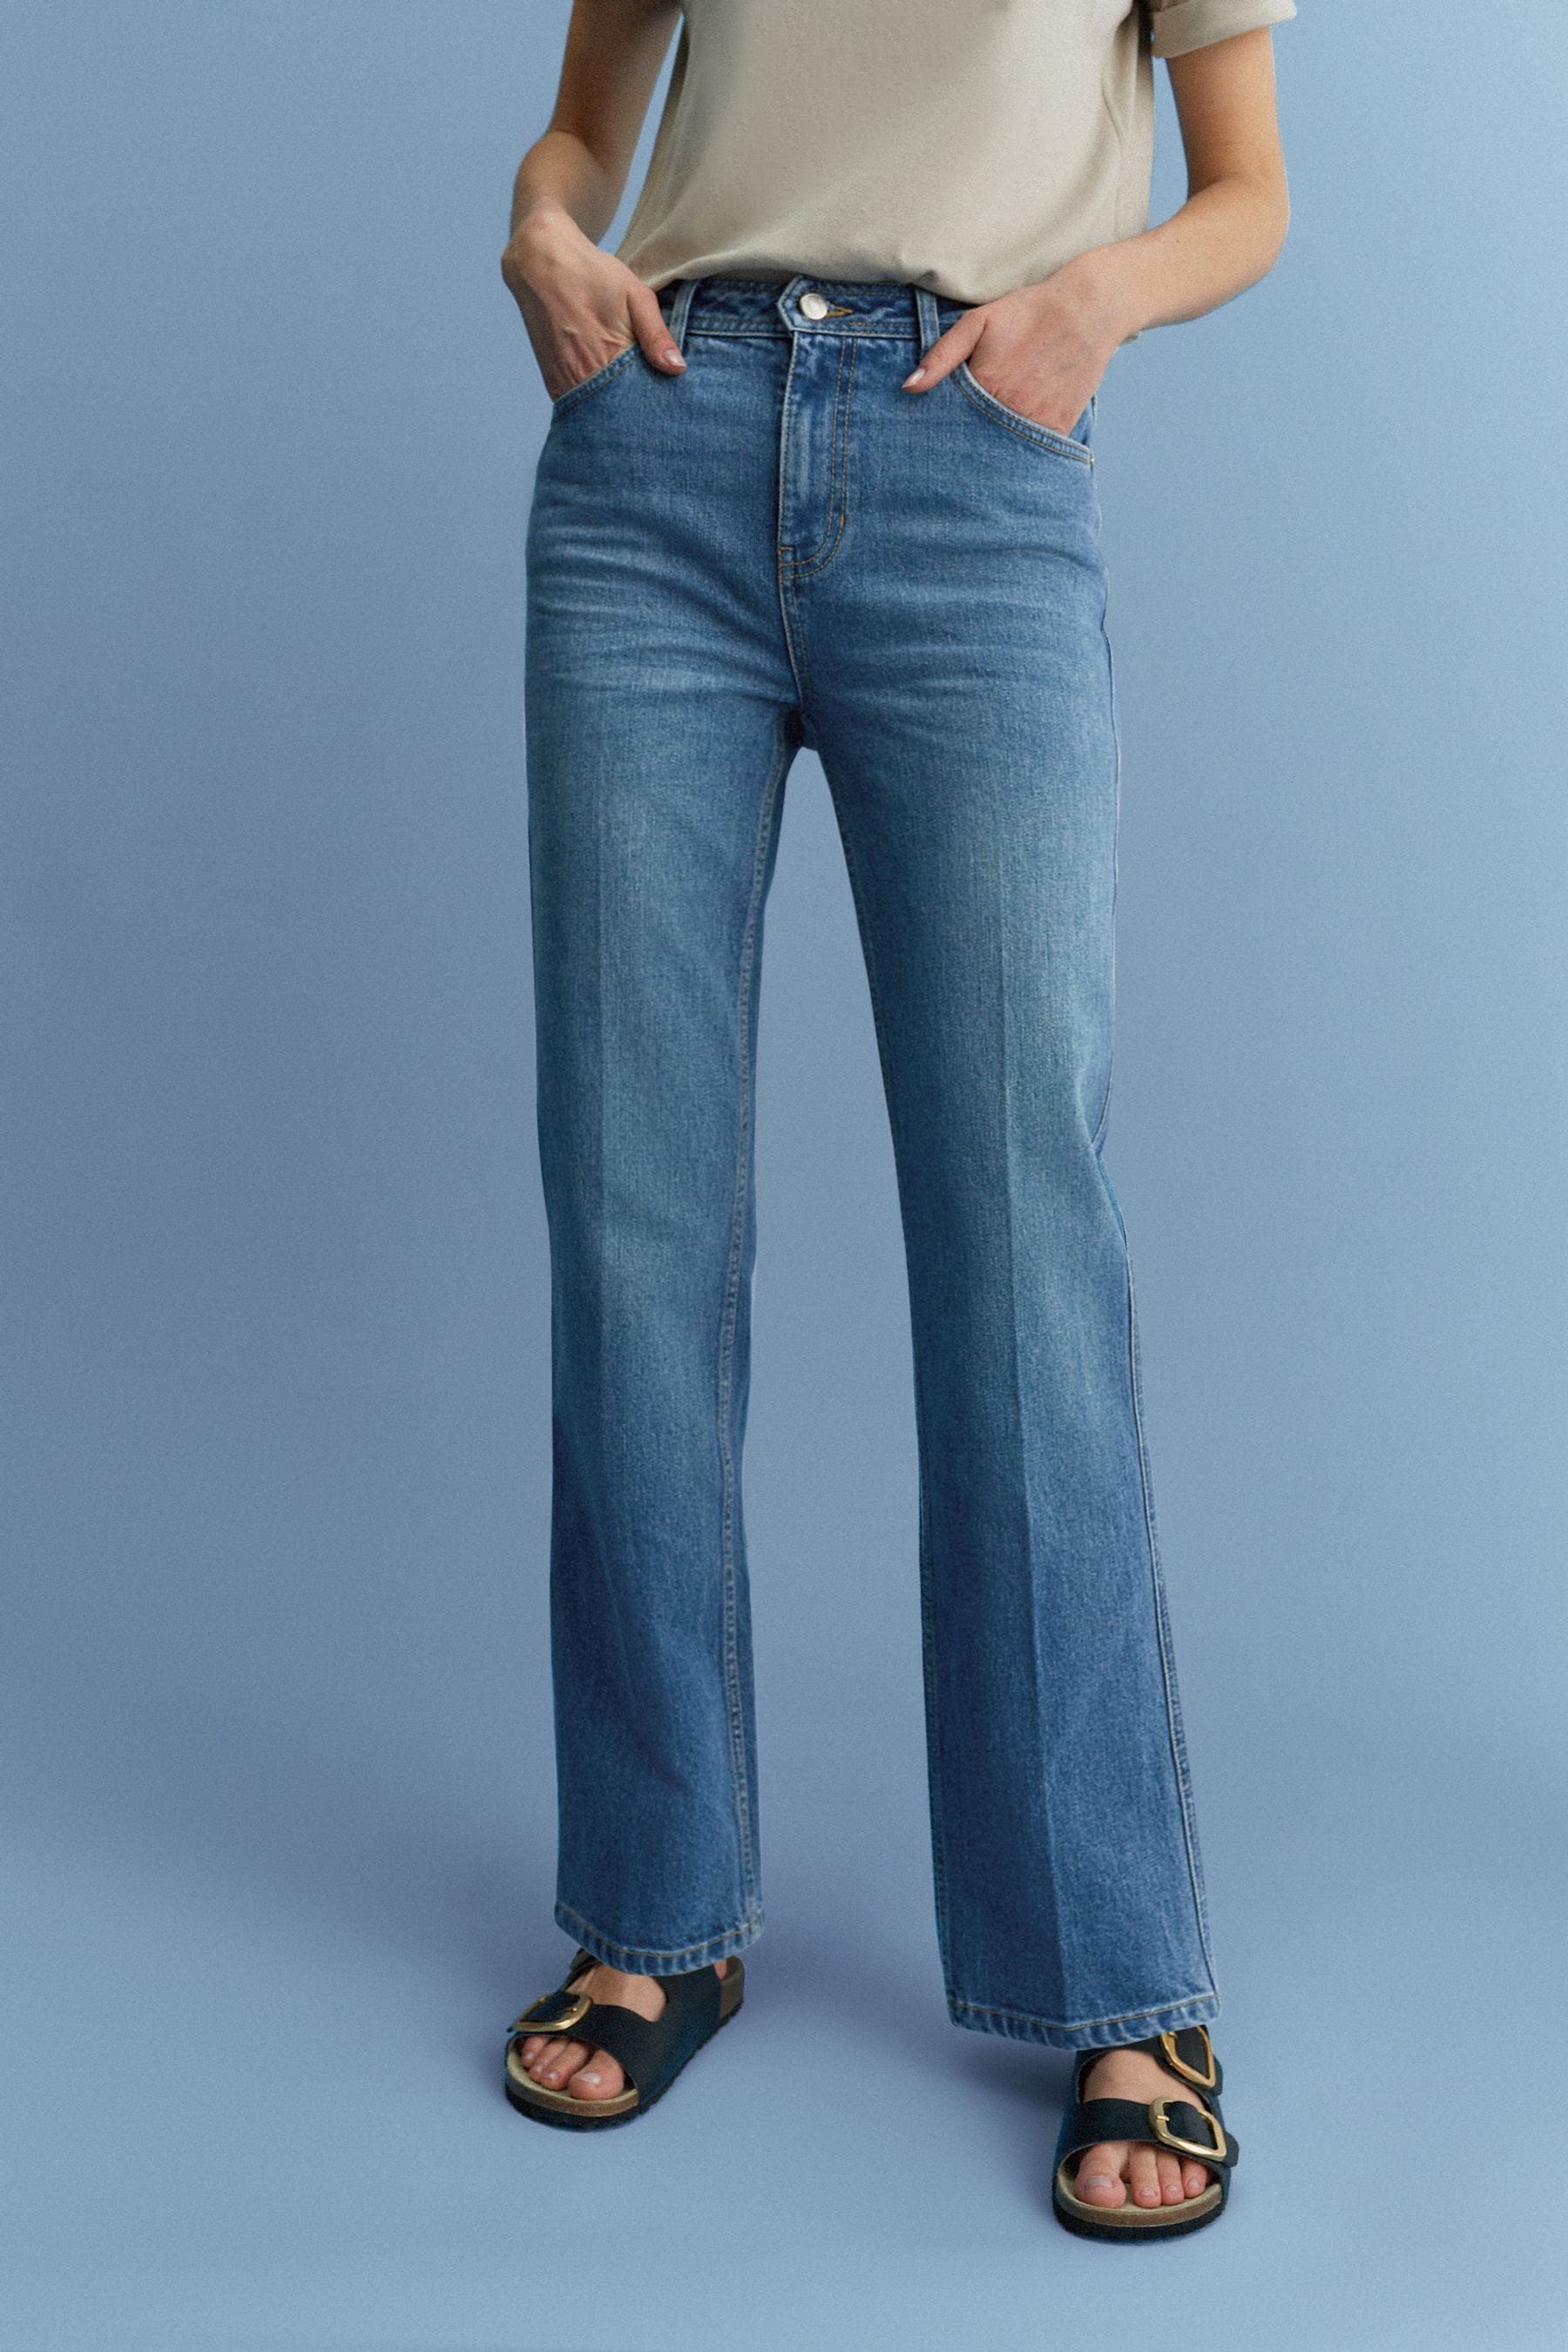 I Exclusively Wear Straight-Leg Jeans—These Are the Best | Who What Wear UK